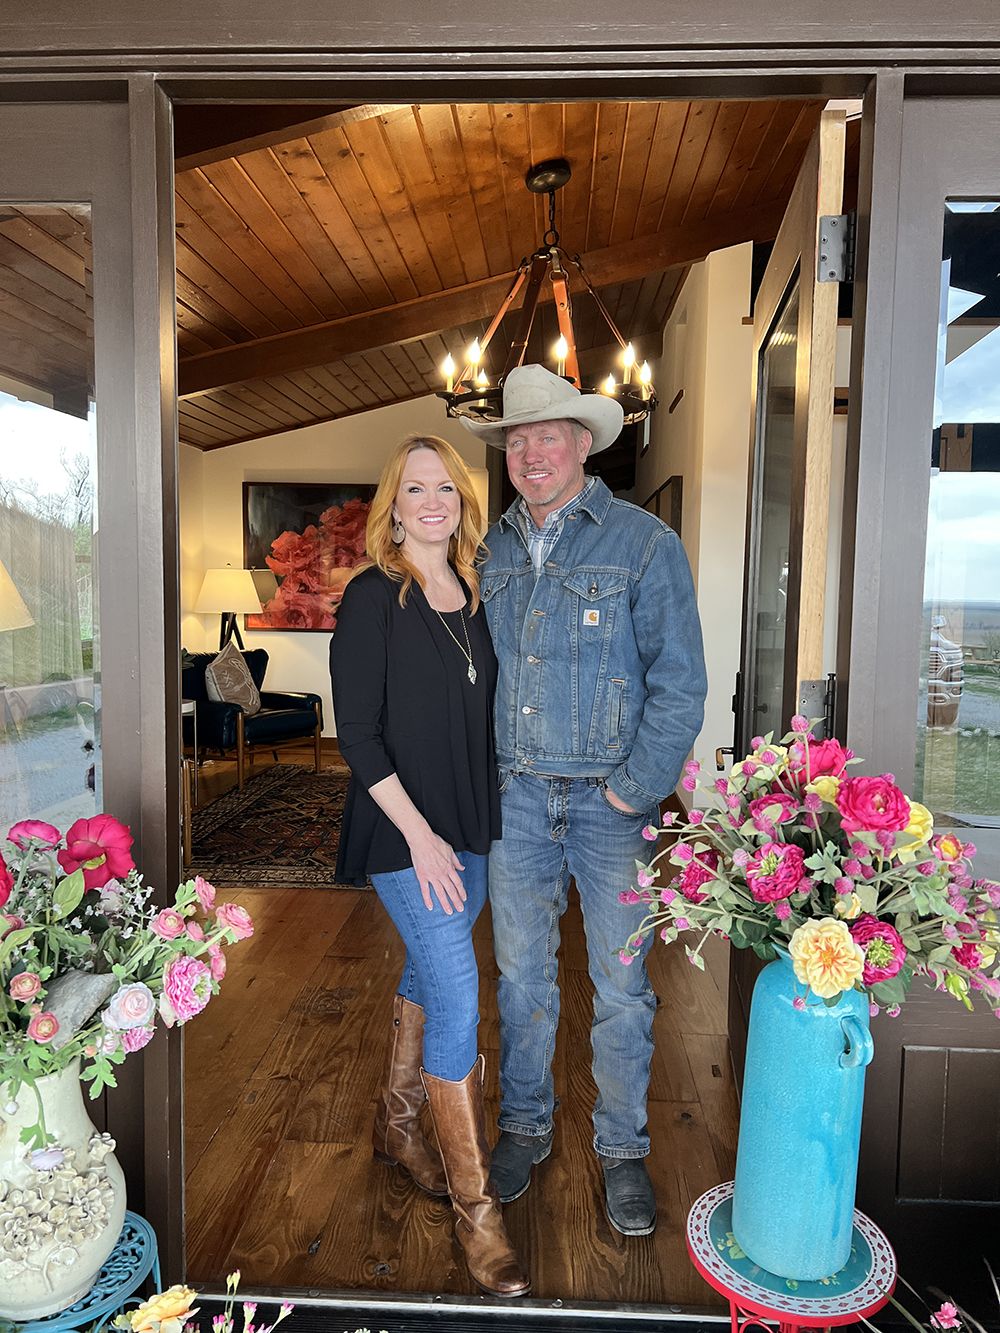 Who worked cattle: Ree Drummond or Her Husband Ladd?